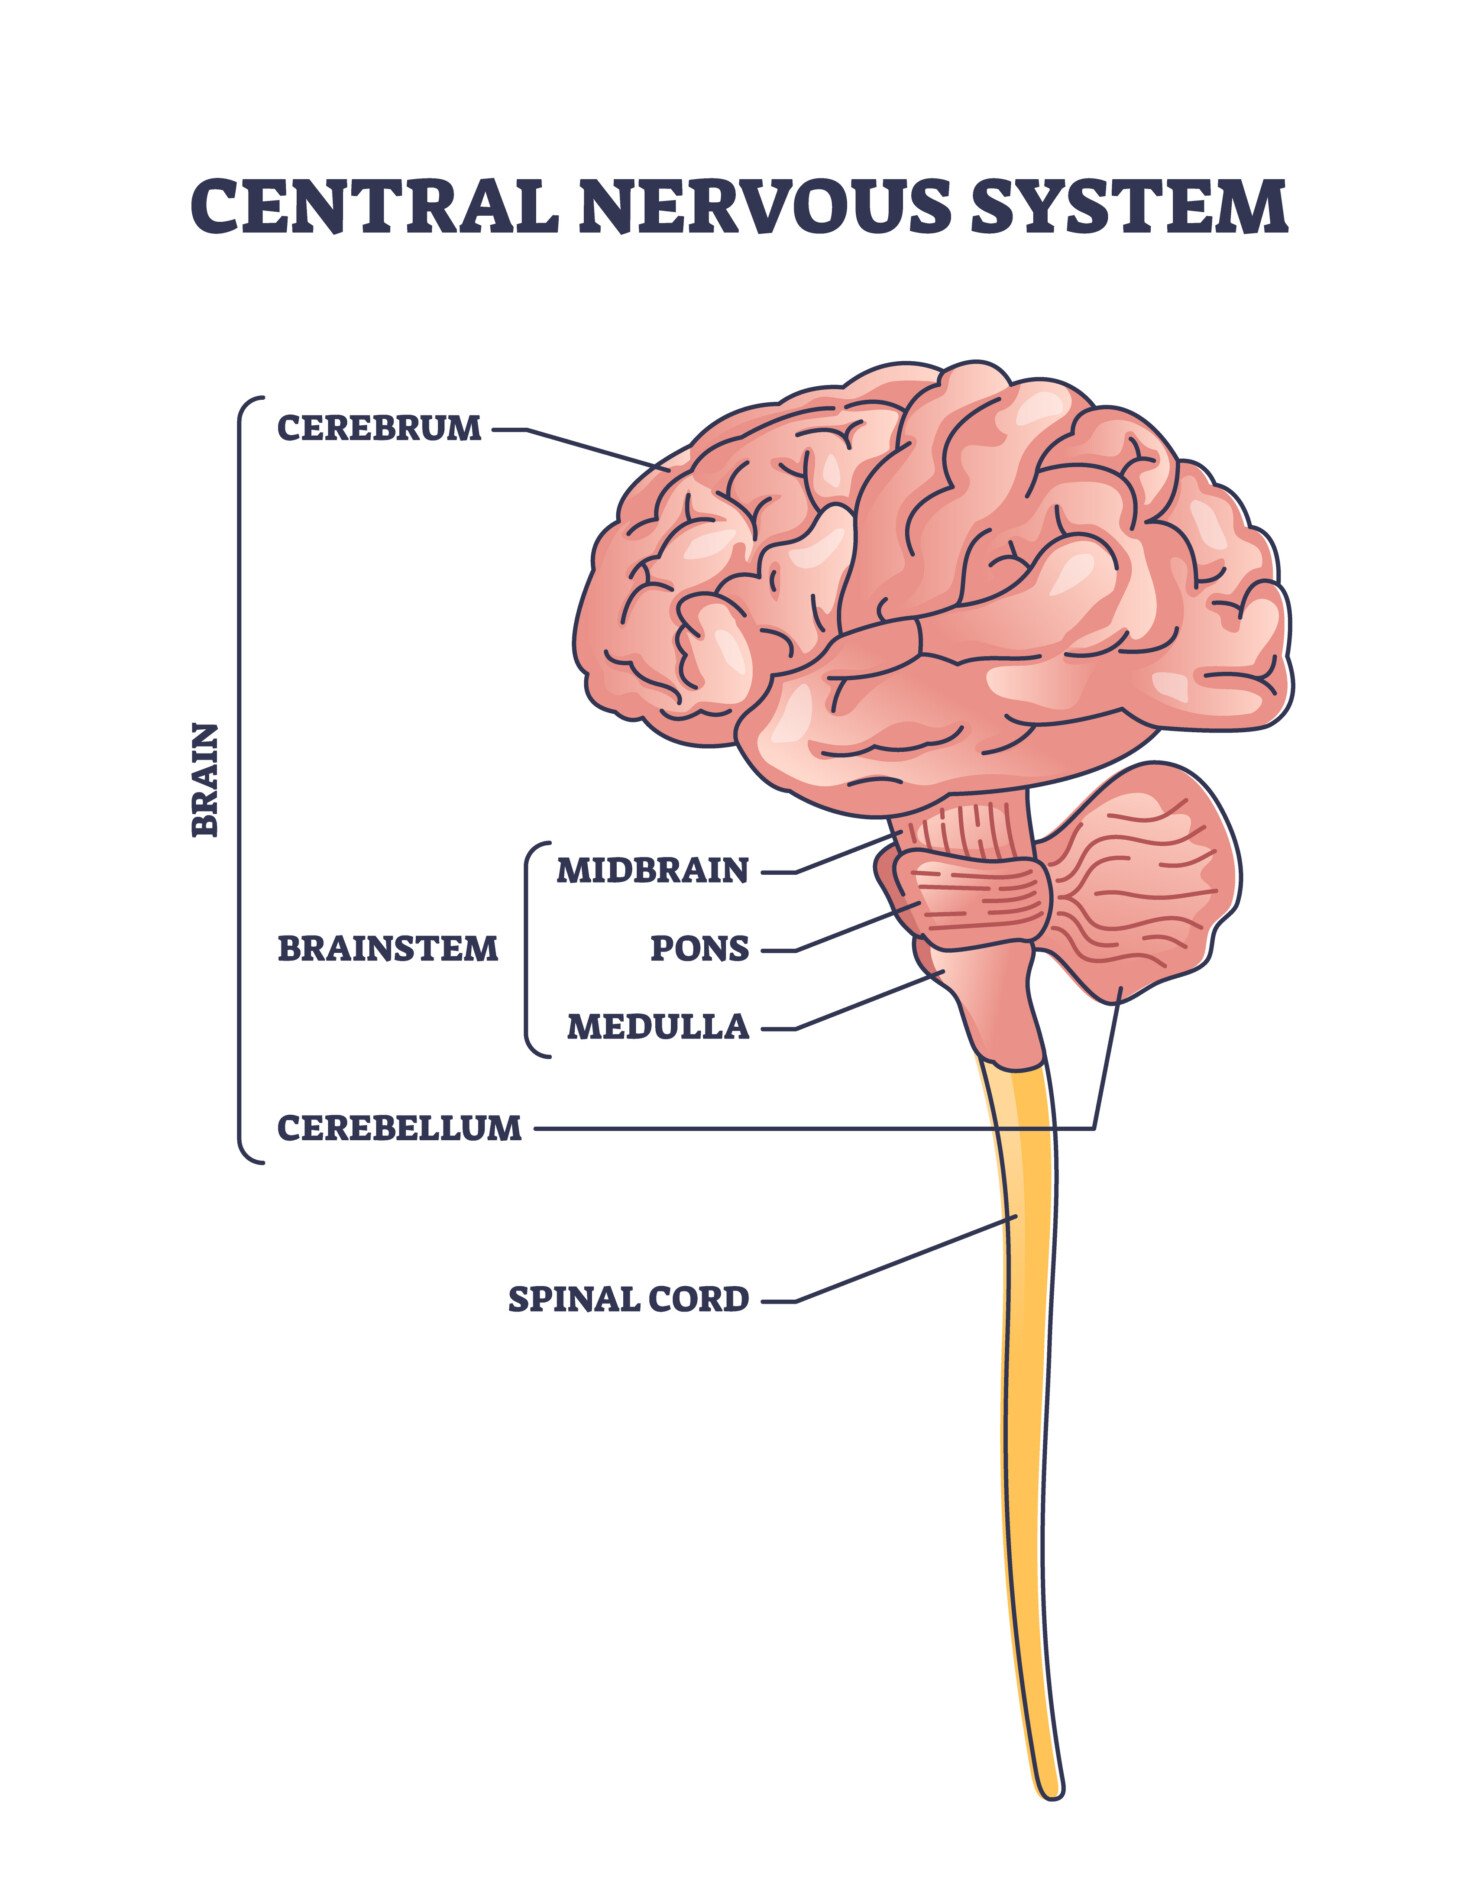 Central nervous system structure outline diagram. Labeled with cerebrum, brainstem, cerebellum and spinal cord